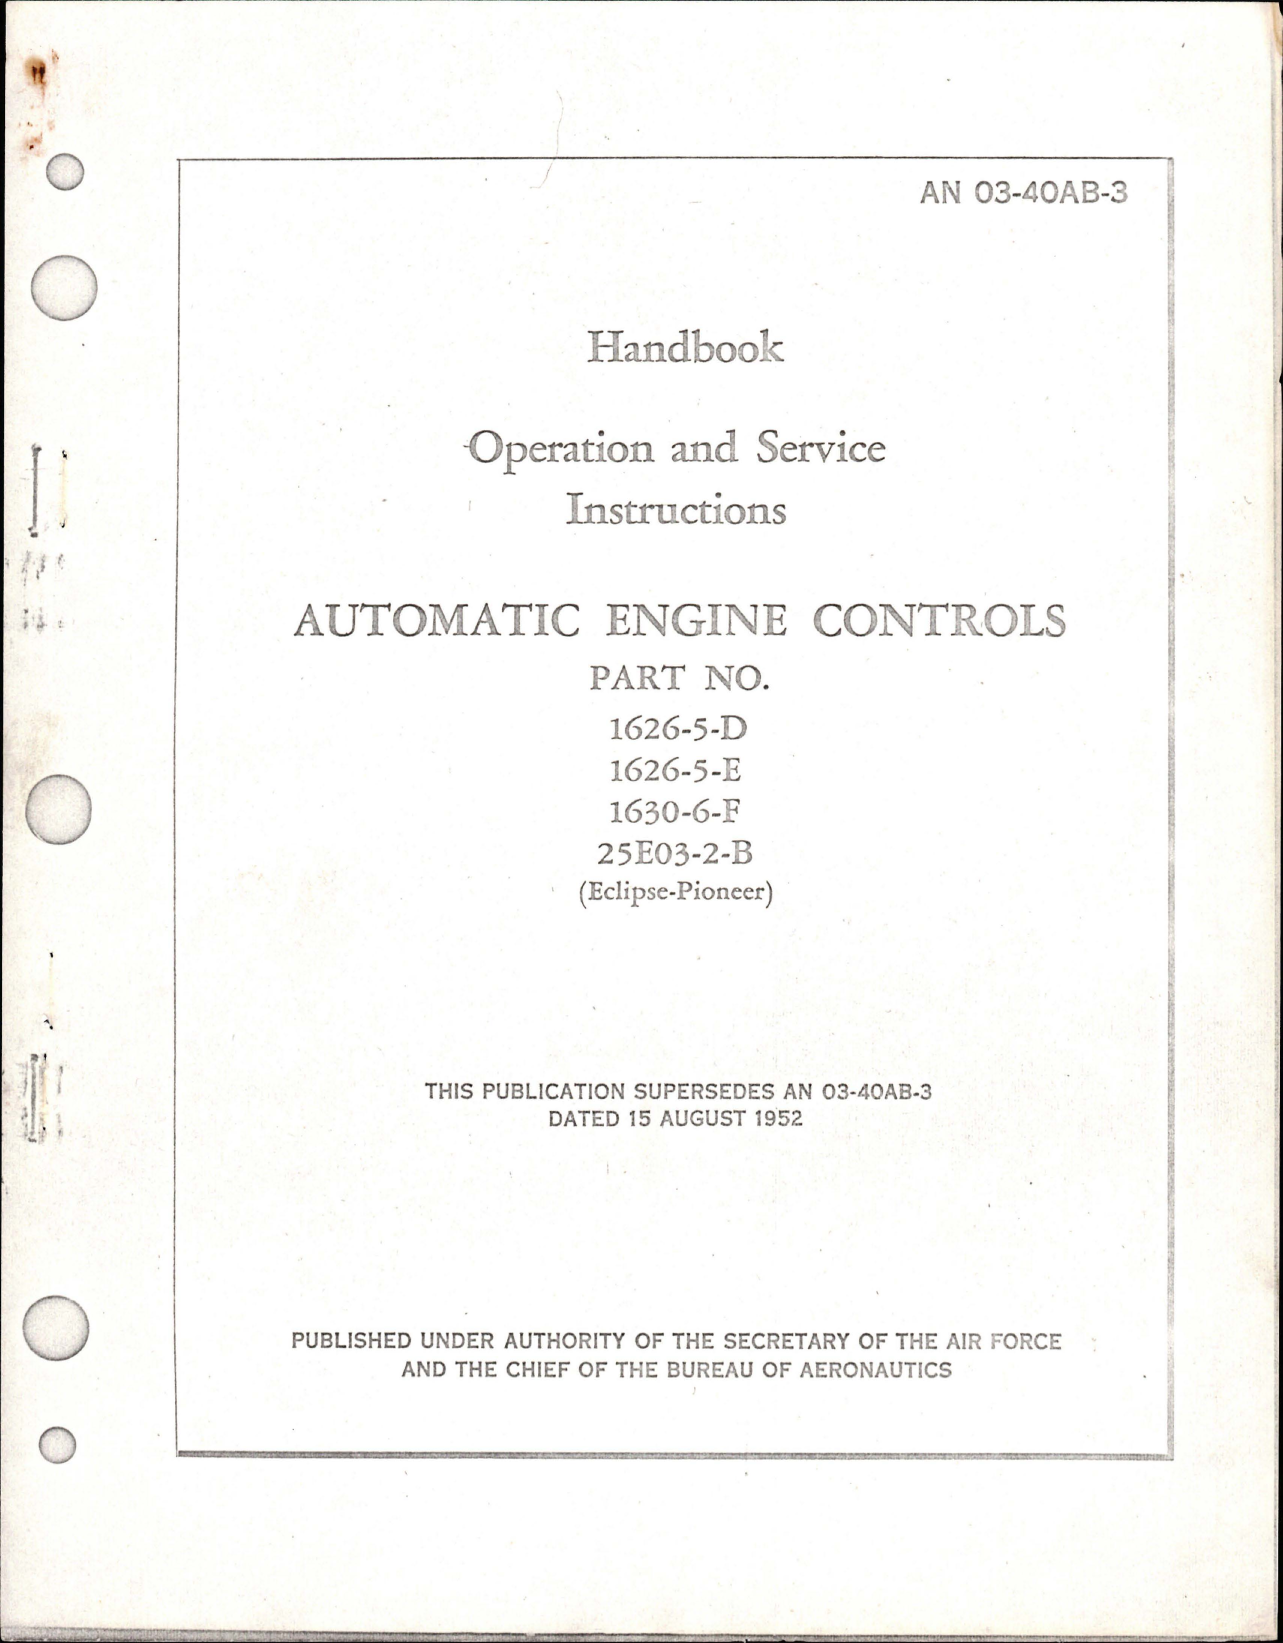 Sample page 1 from AirCorps Library document: Operation and Service Instructions for Automatic Engine Controls - Parts 1626-5-D, 1626-5-E, 1630-6-F, and 25E03-2-B